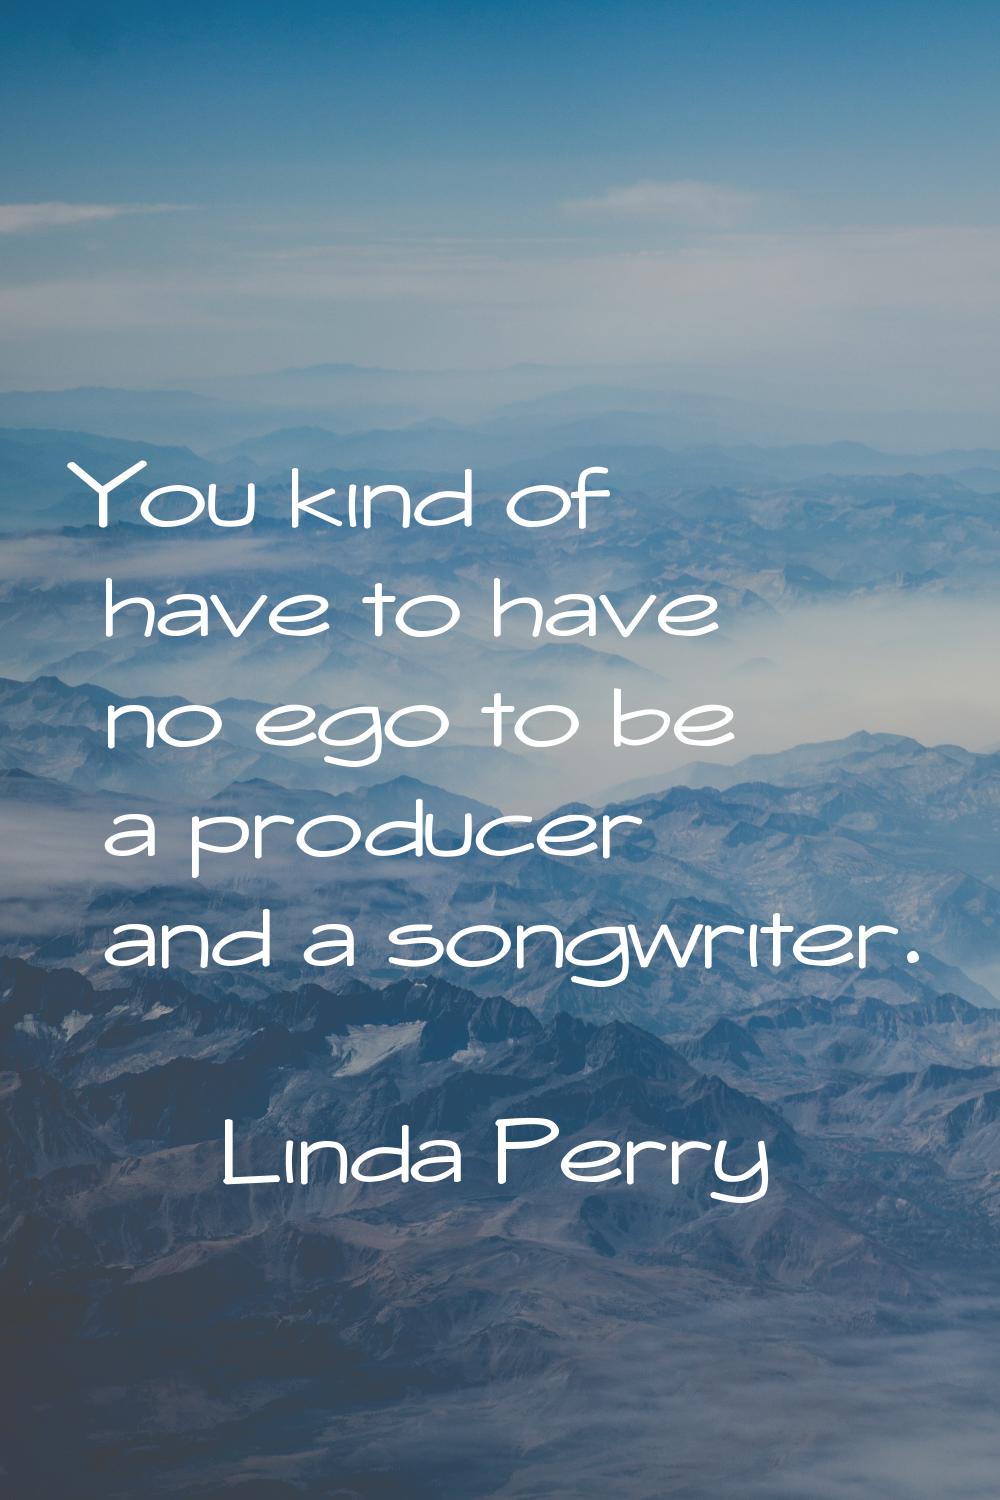 You kind of have to have no ego to be a producer and a songwriter.